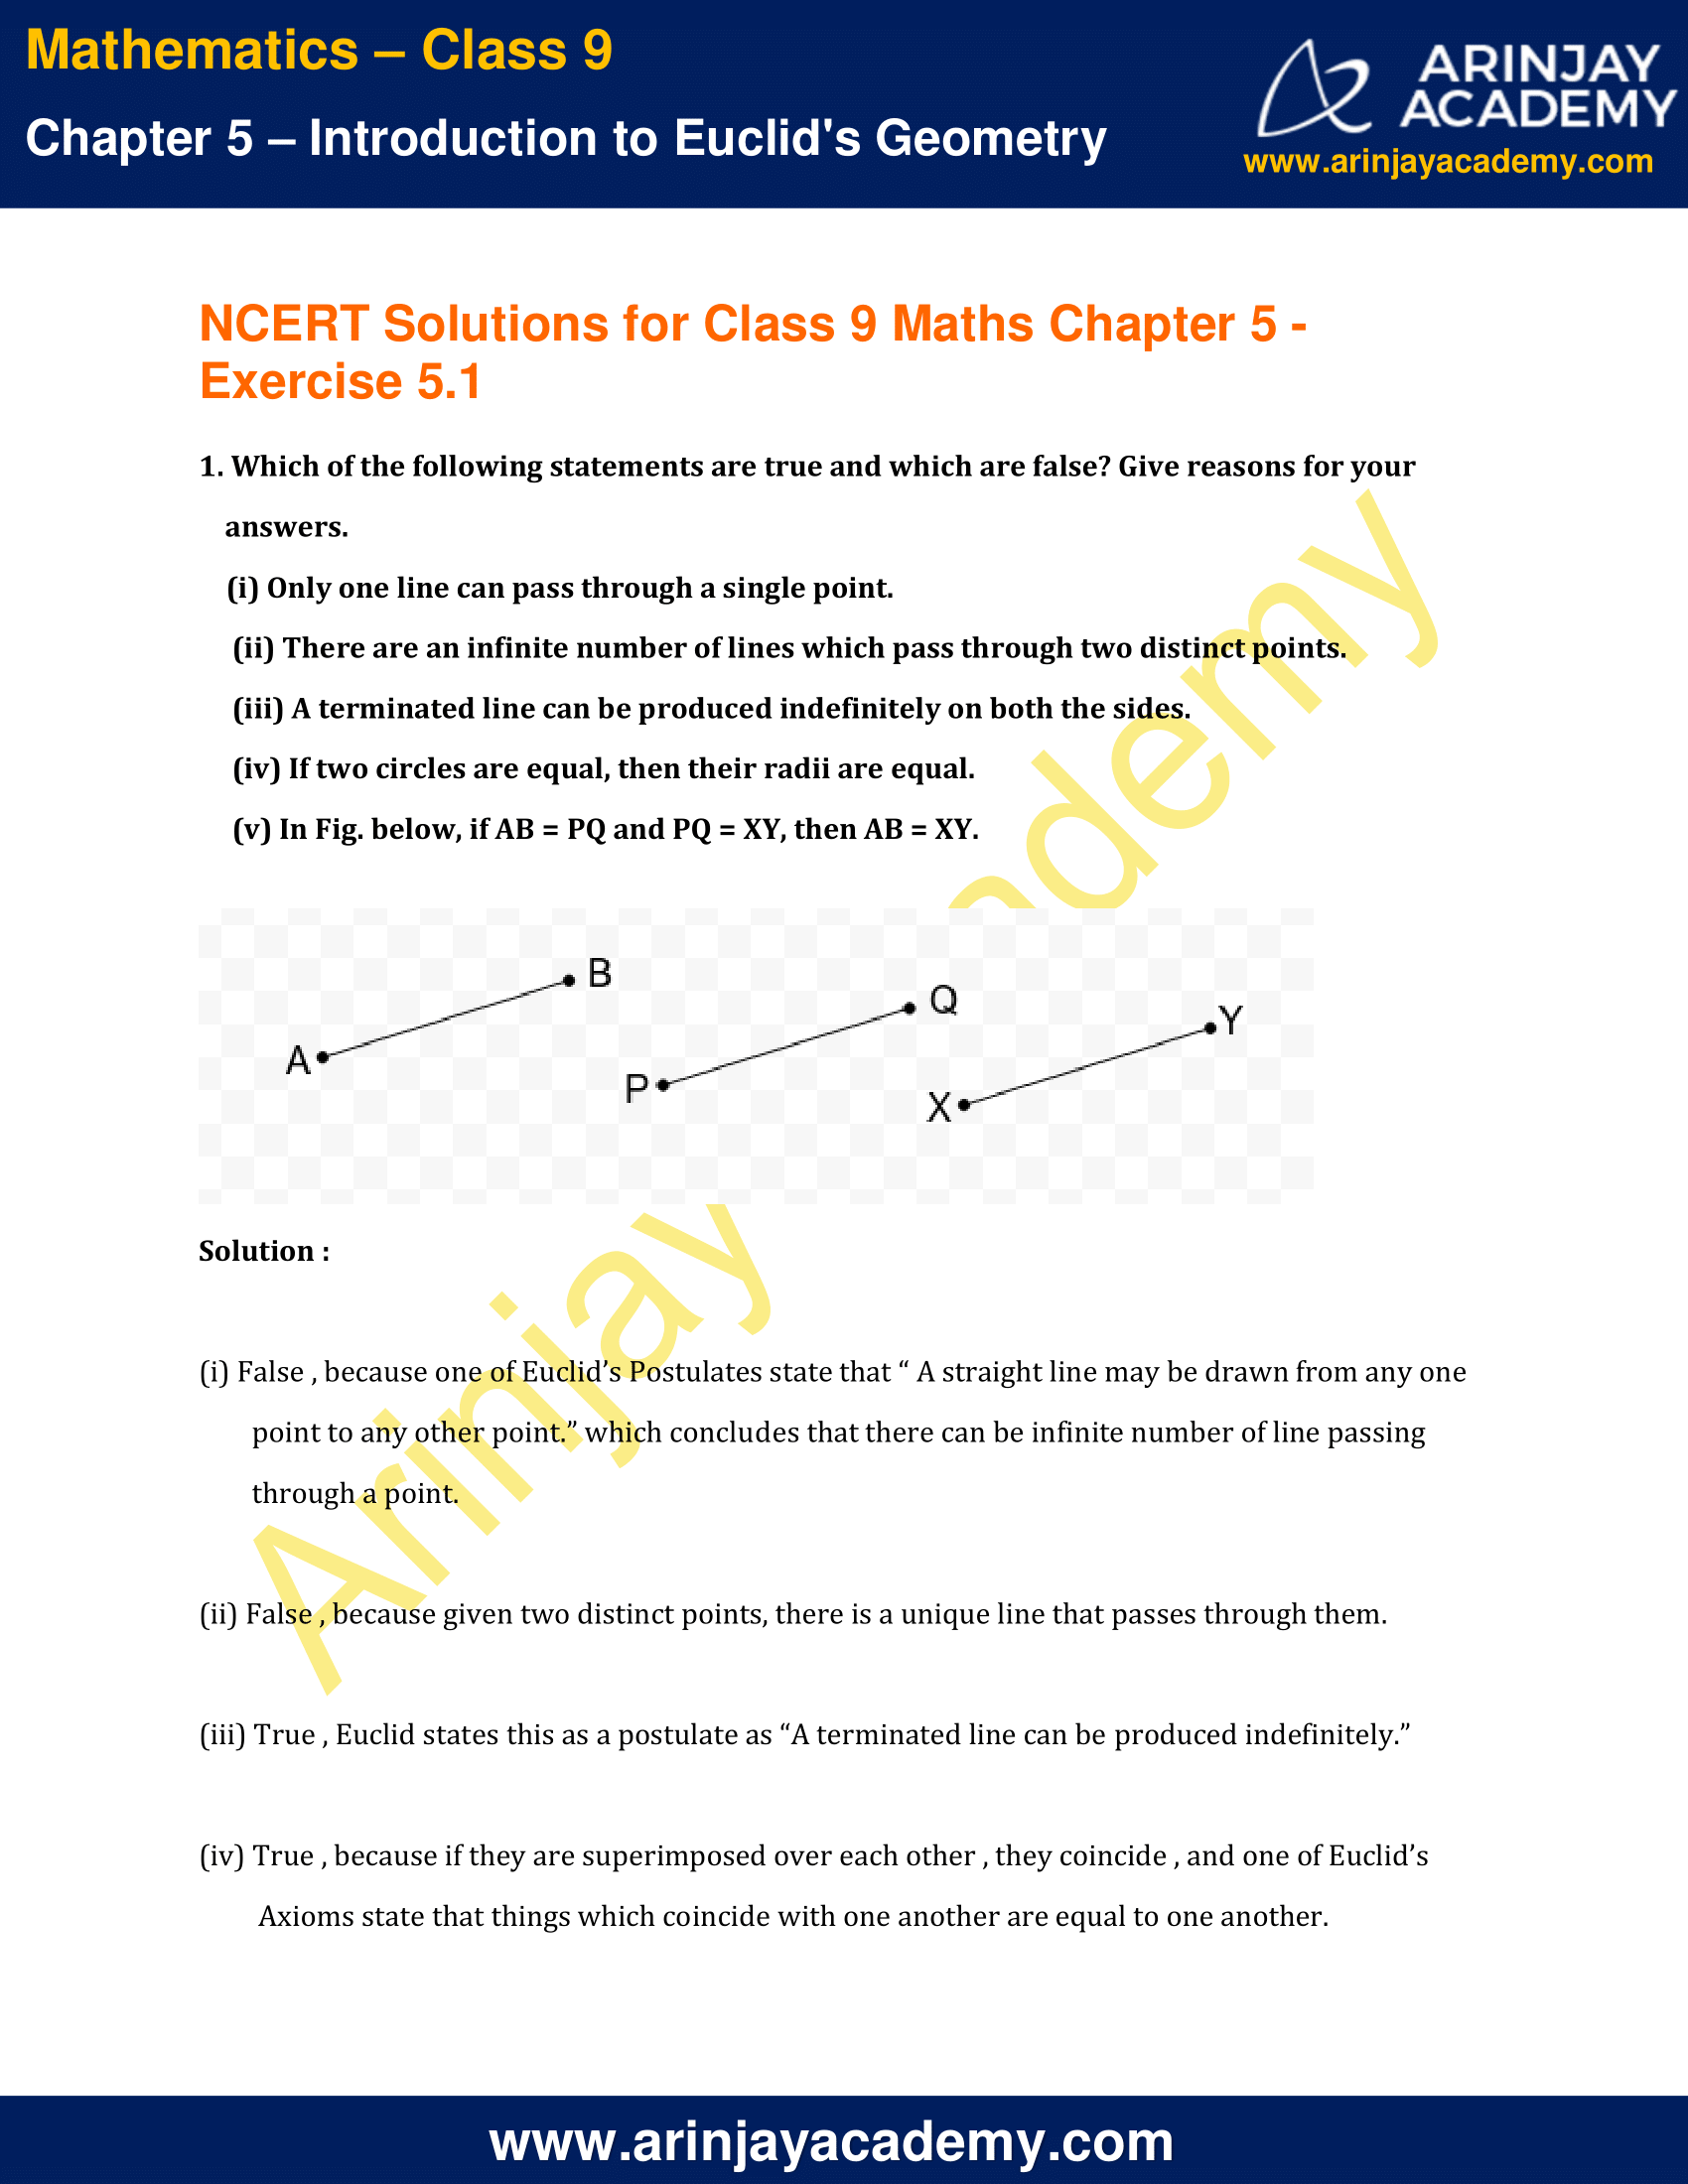 NCERT Solutions for Class 9 Maths Chapter 5 Exercise 5.1 image 1